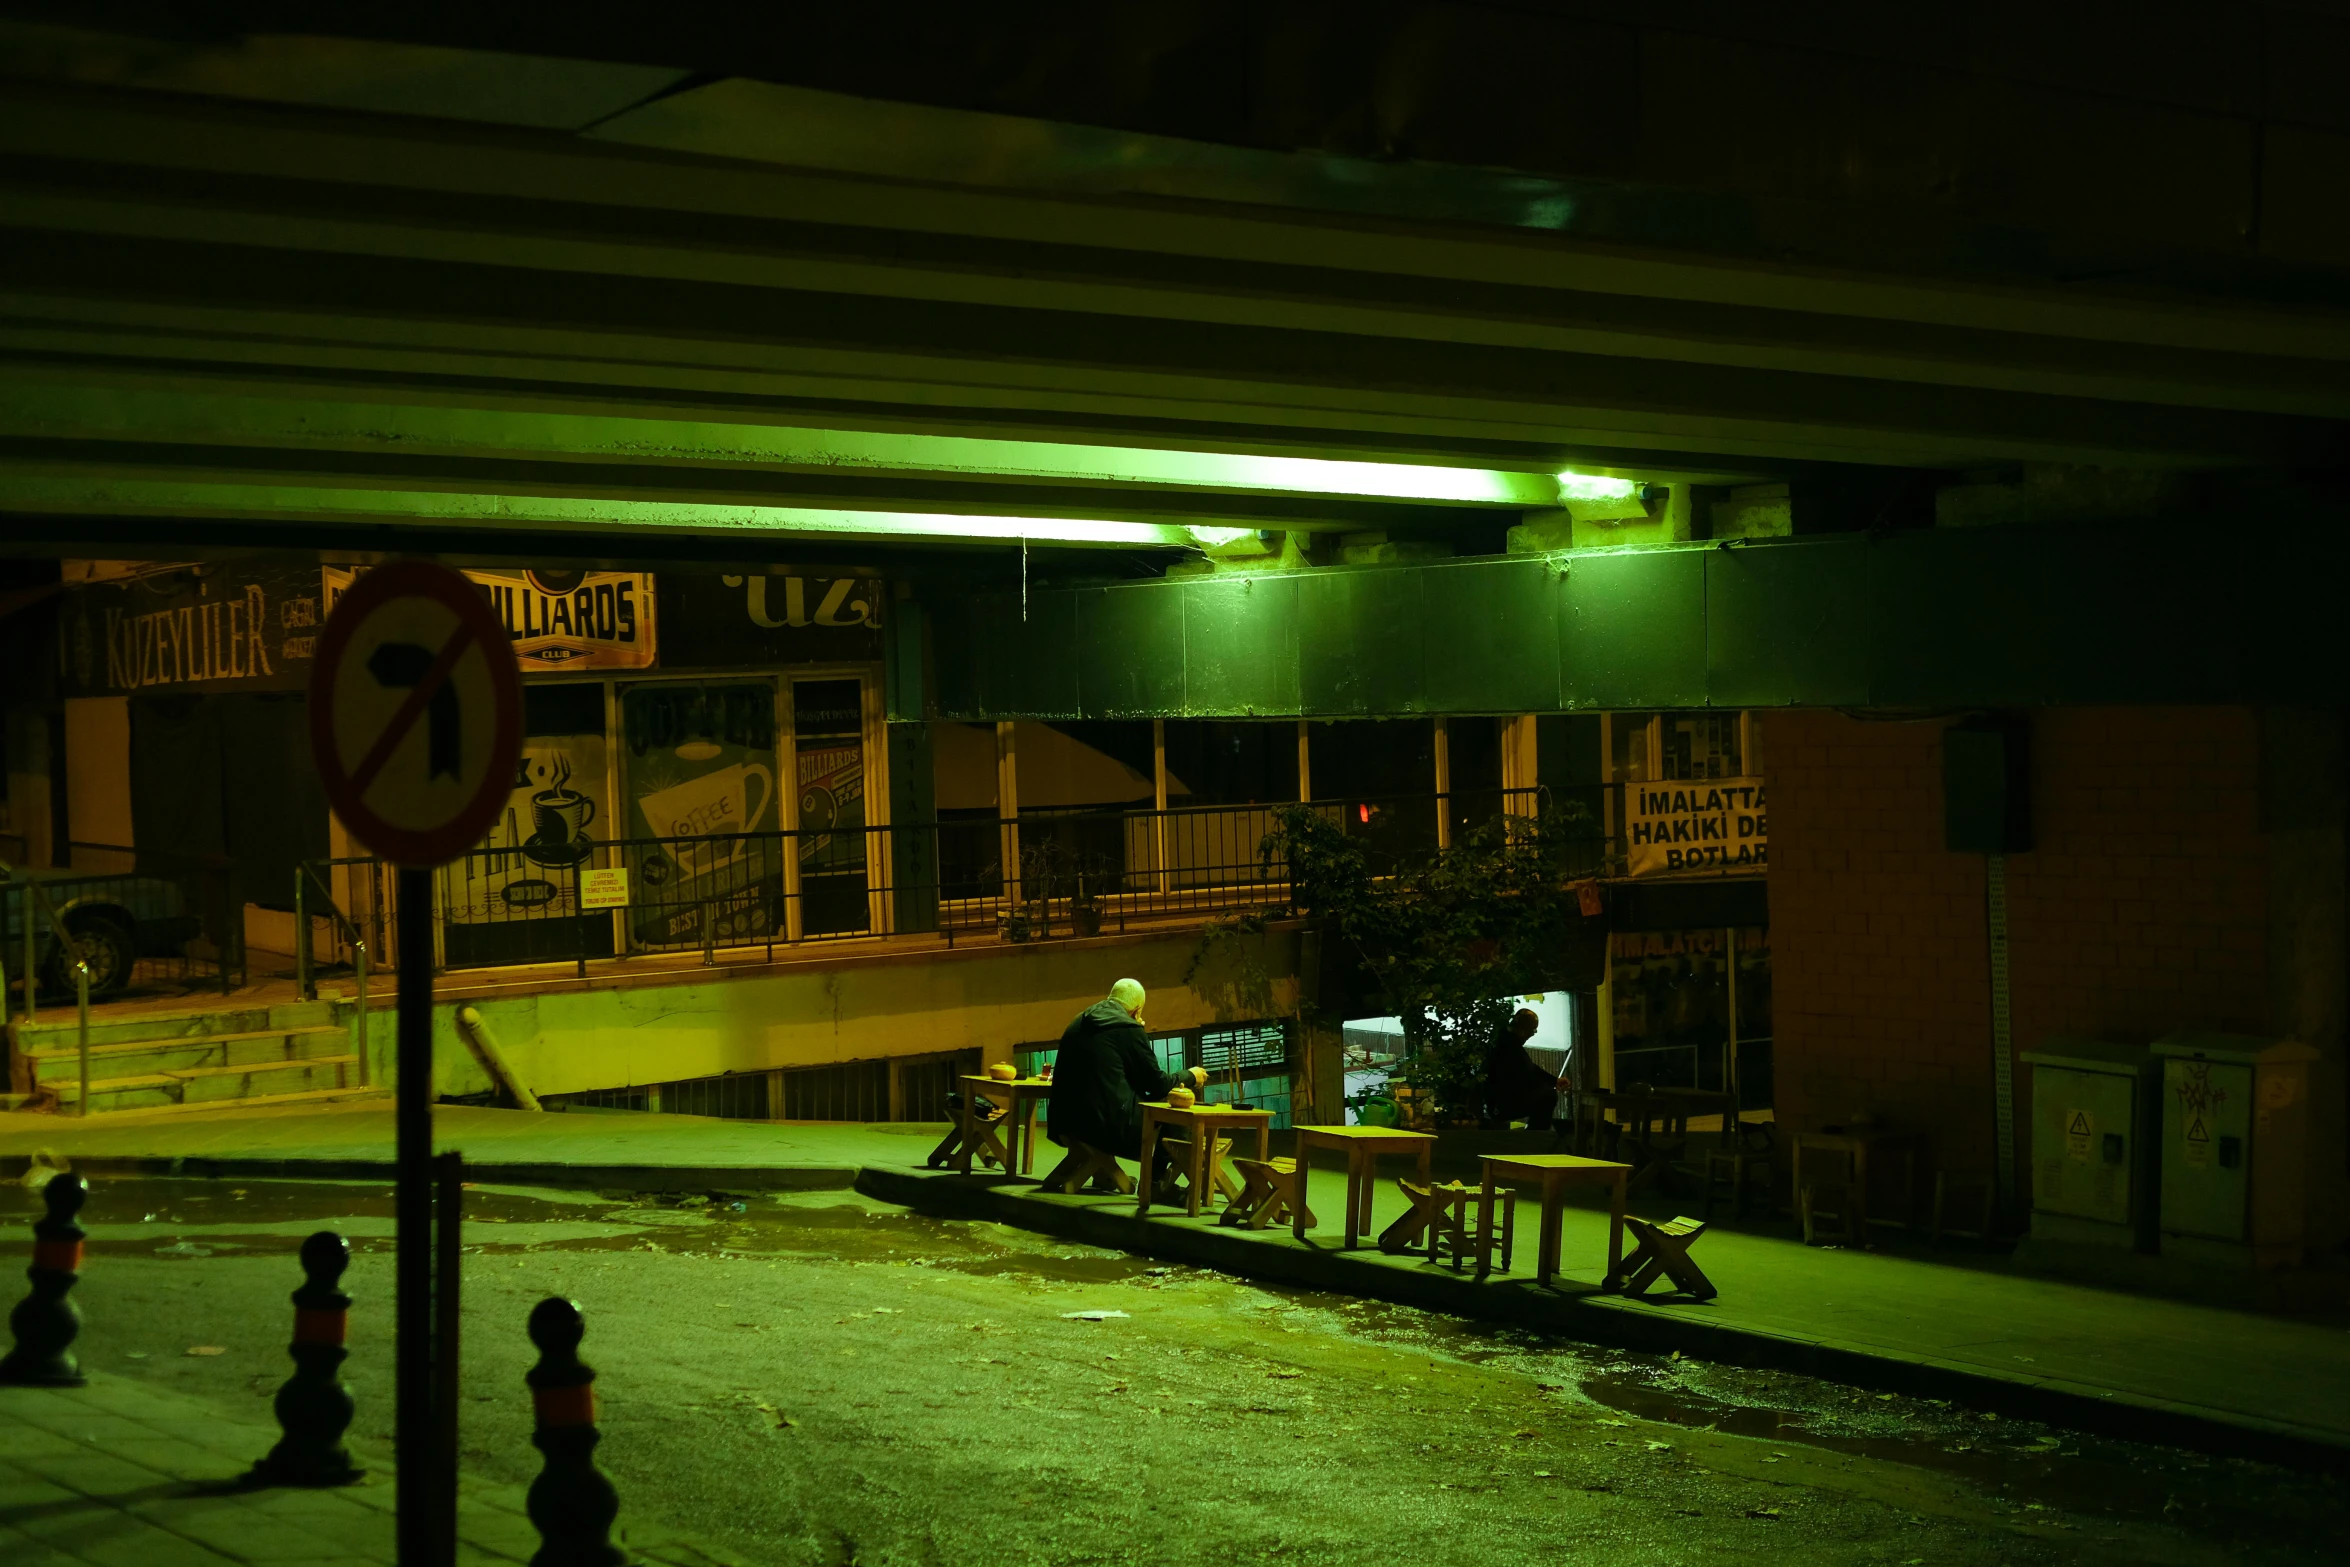 several people sitting at tables and standing on train tracks at night